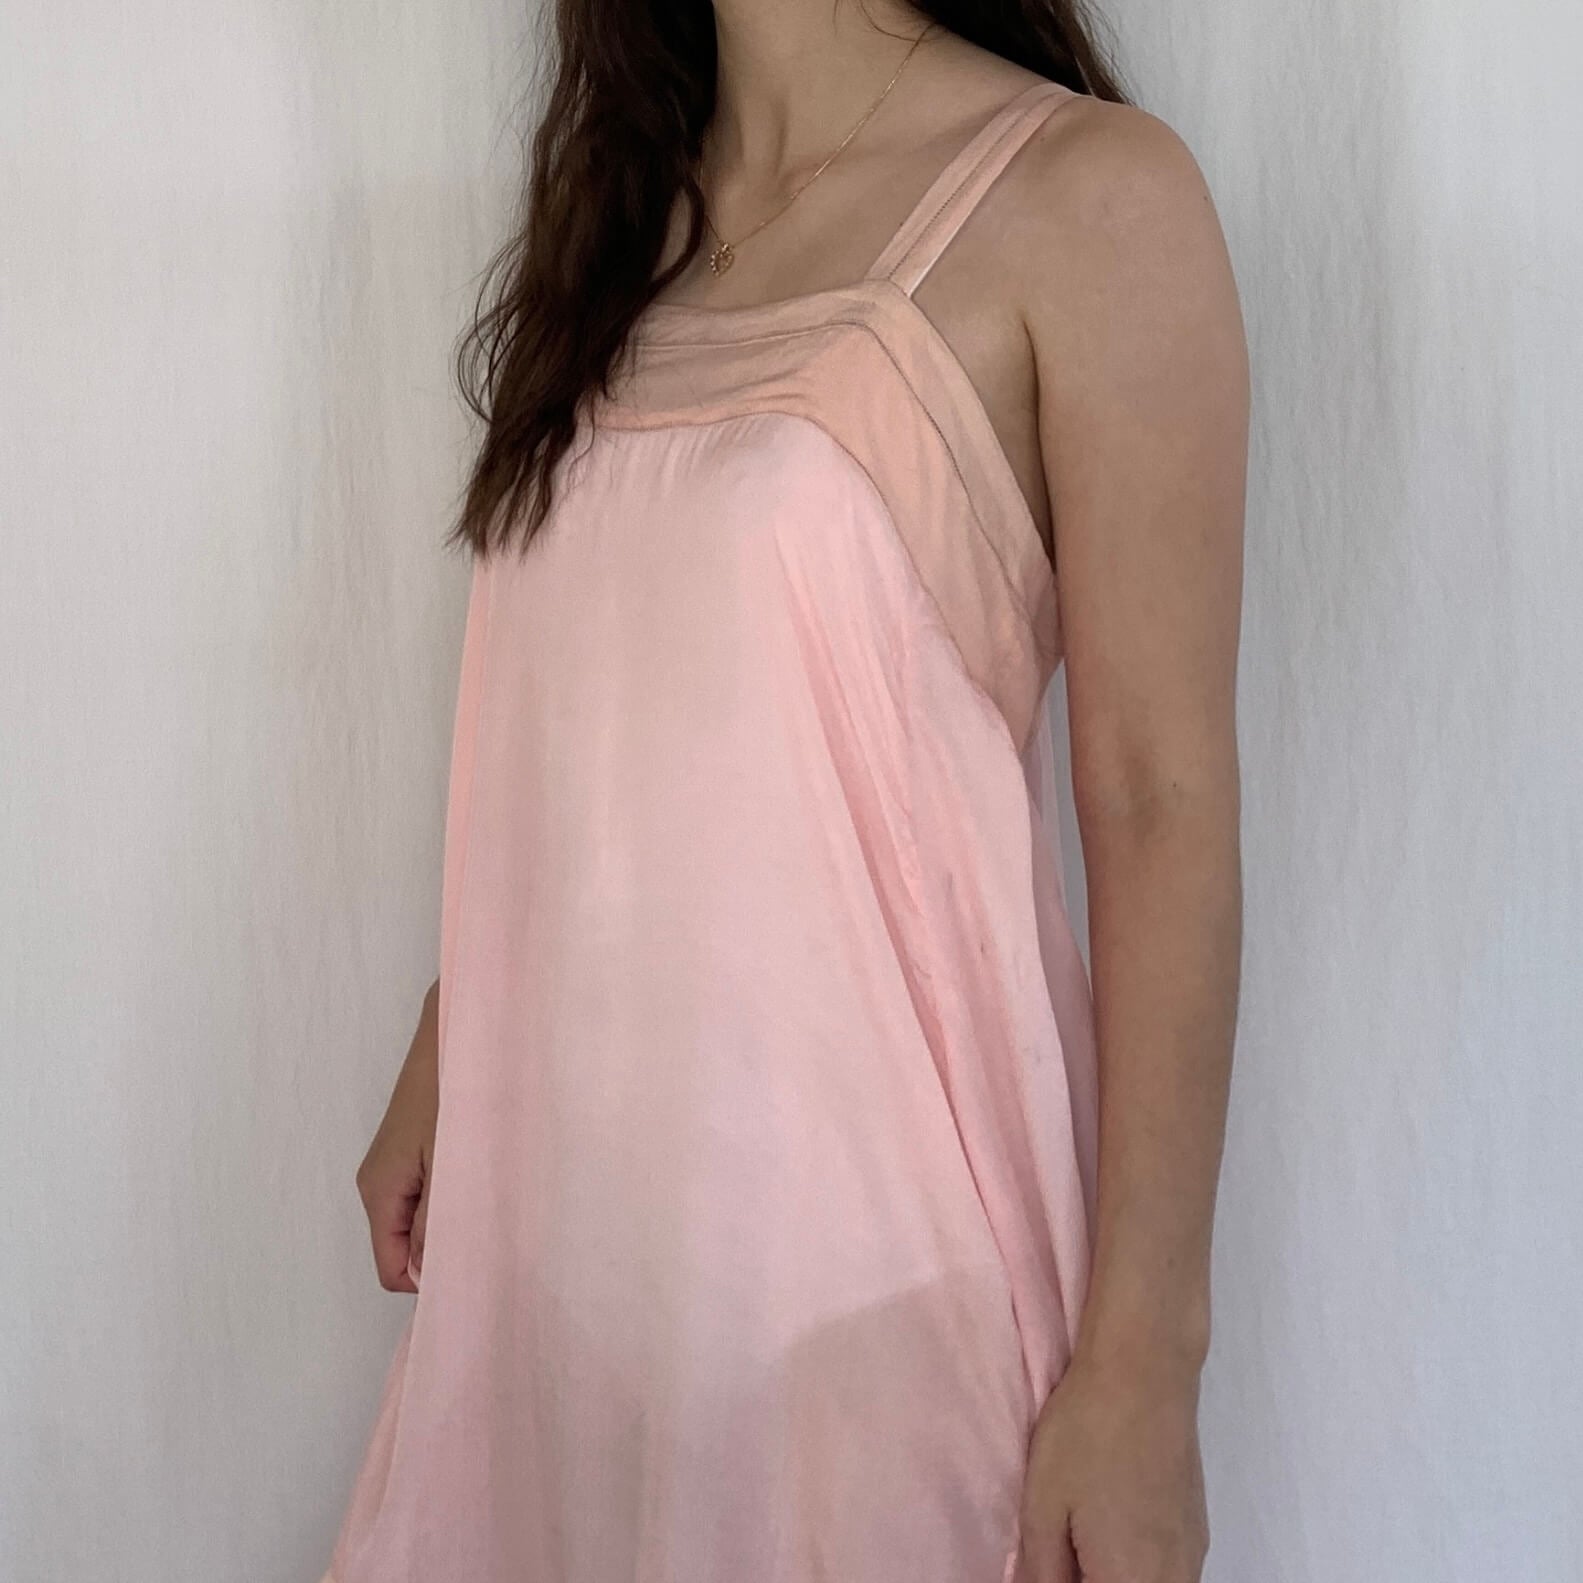 side view of model wearing the vintage dress